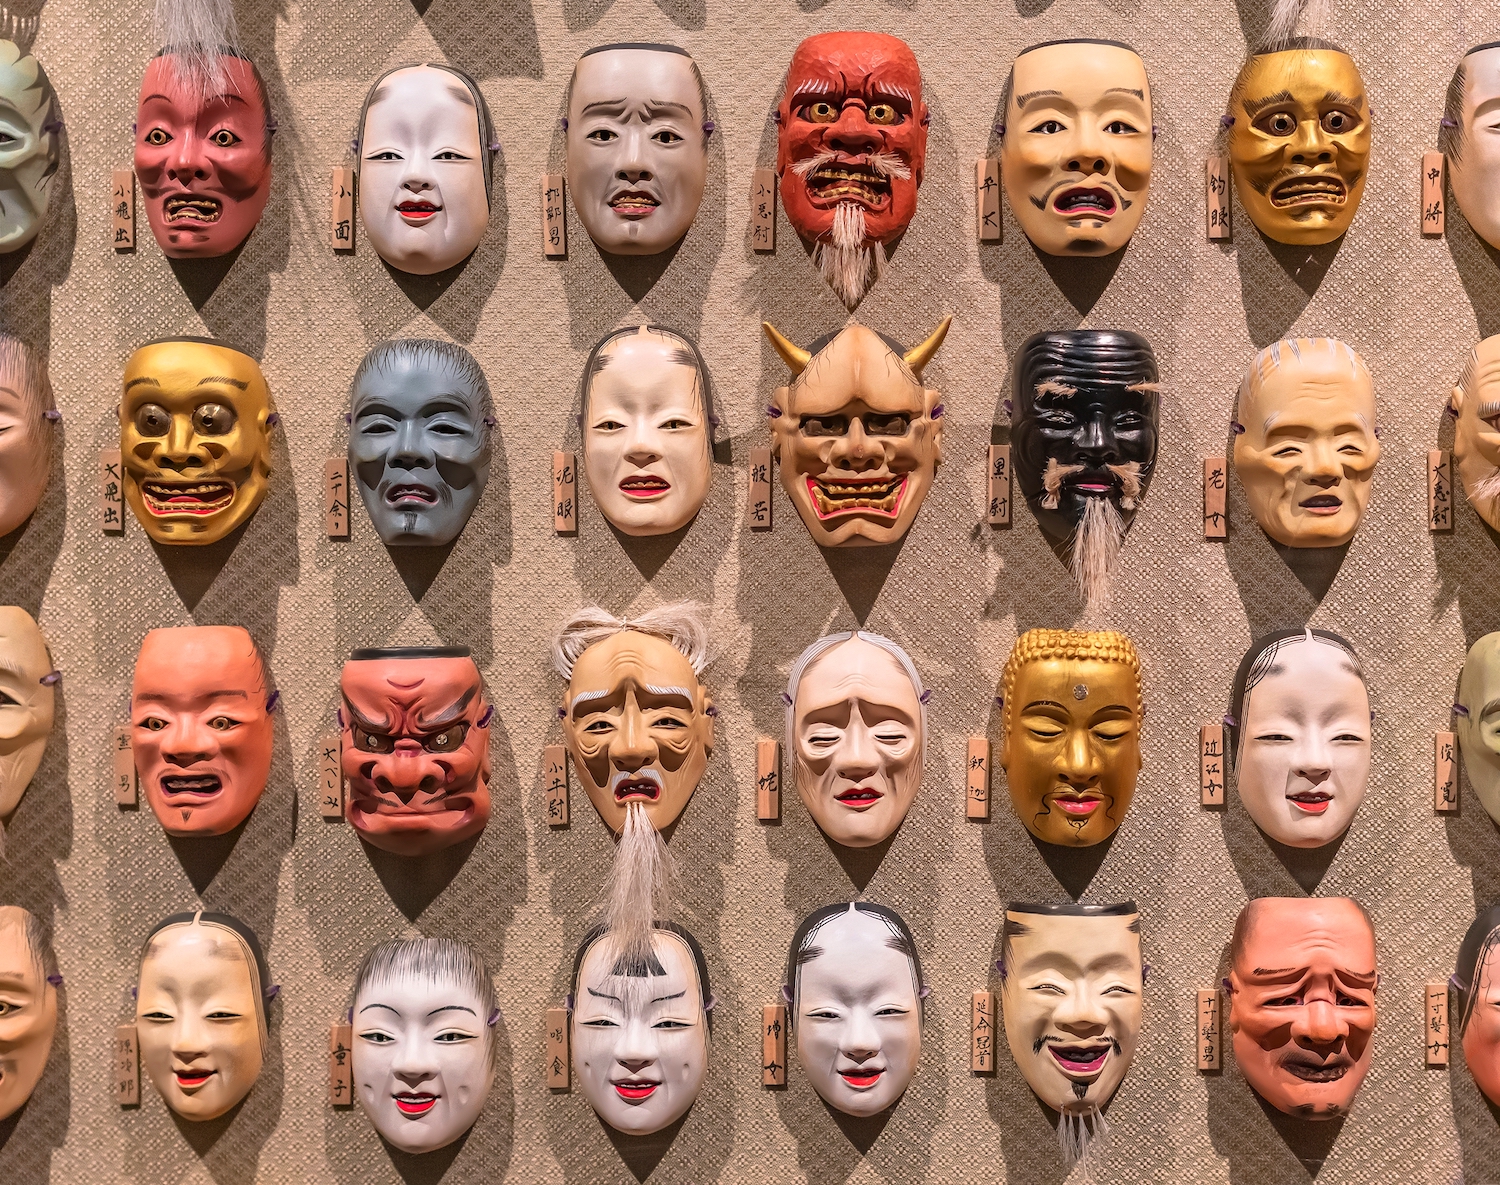 A bunch of Japanese Noh theater masks hanging in rows on a wall depicting various faces expressions belonging to the collection of the ART AQUARIUM Artist Hidetomo Kimura.